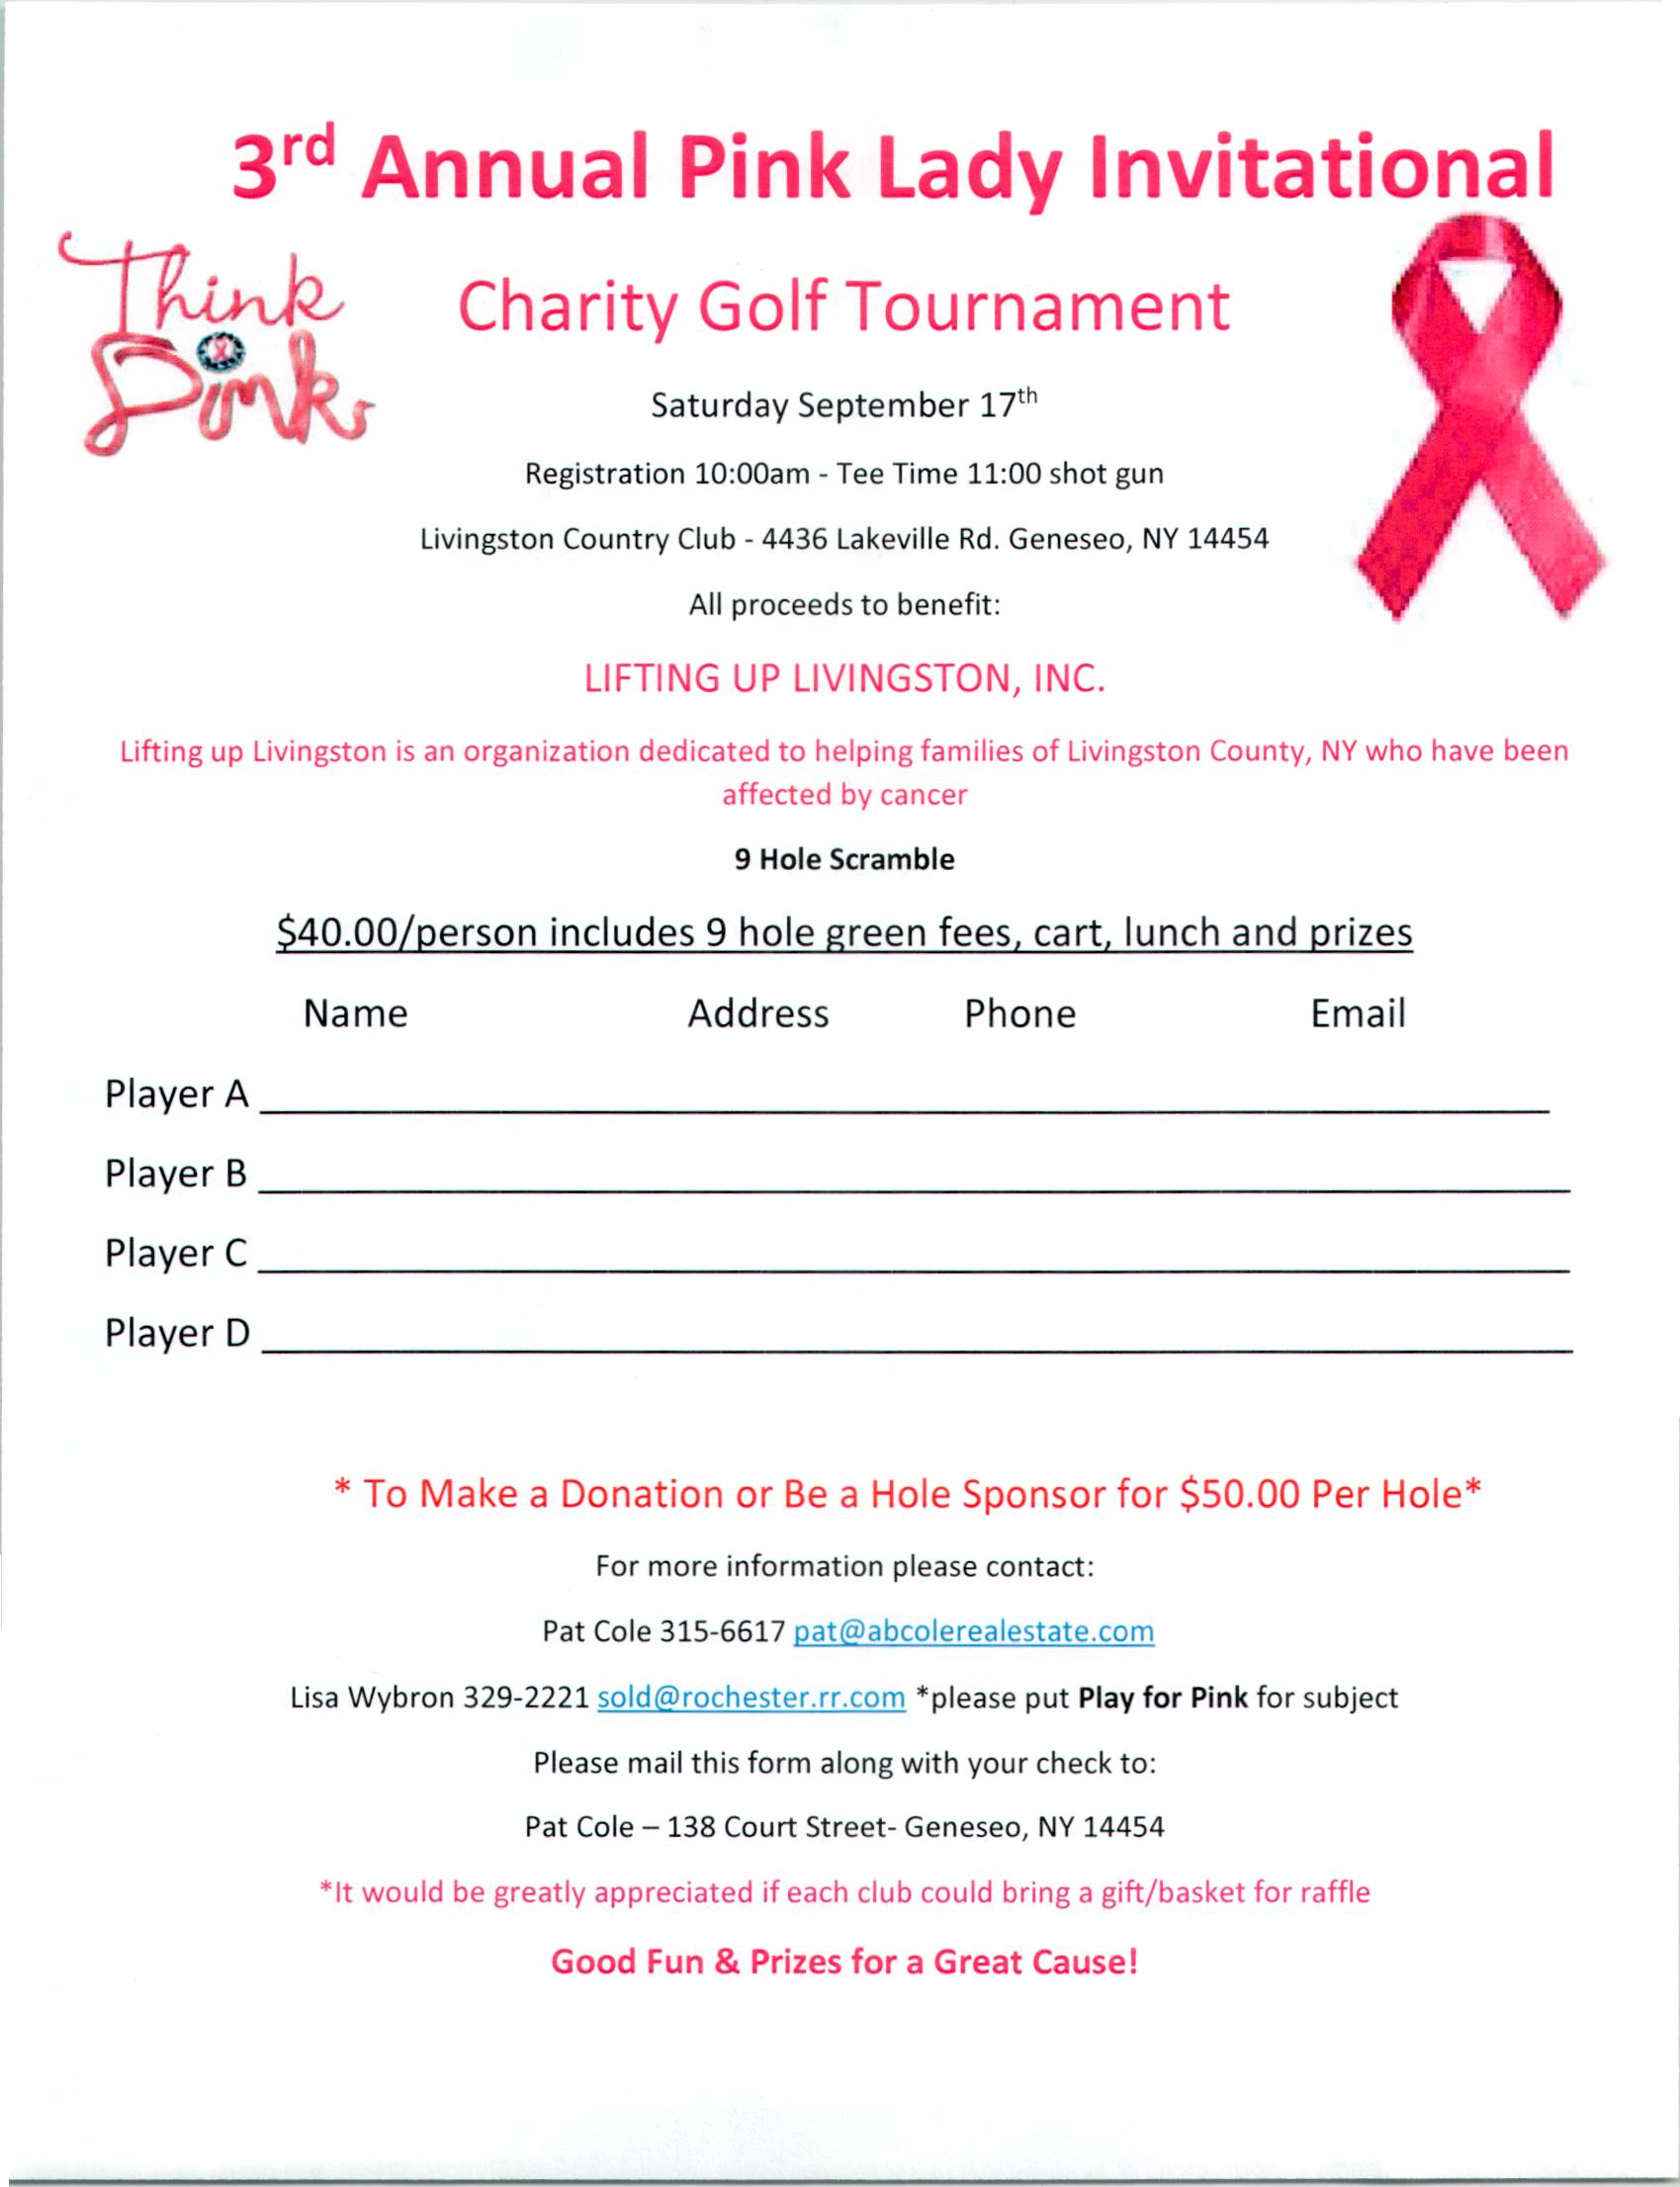 Play for Pink Golf Tournament!